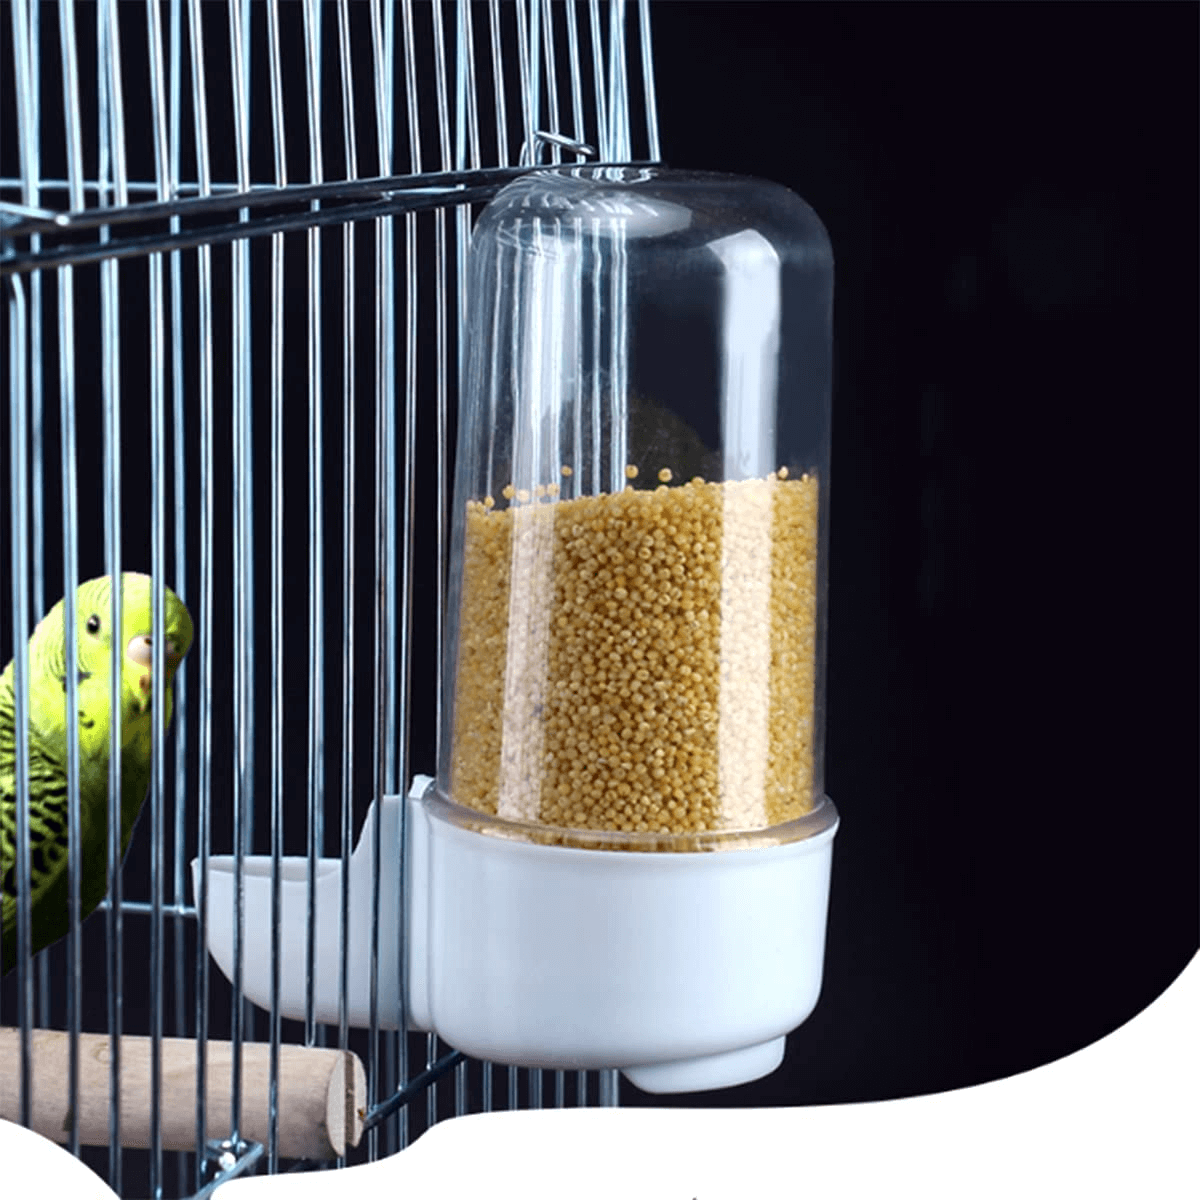 Bird Feeder Water Dispenser Automatic Bird Feeder for Cage, 2PCS Bird Feeder and Drinker Set for Cage Parrot Budgie Lovebirds Cockatiel Automatic Feeding